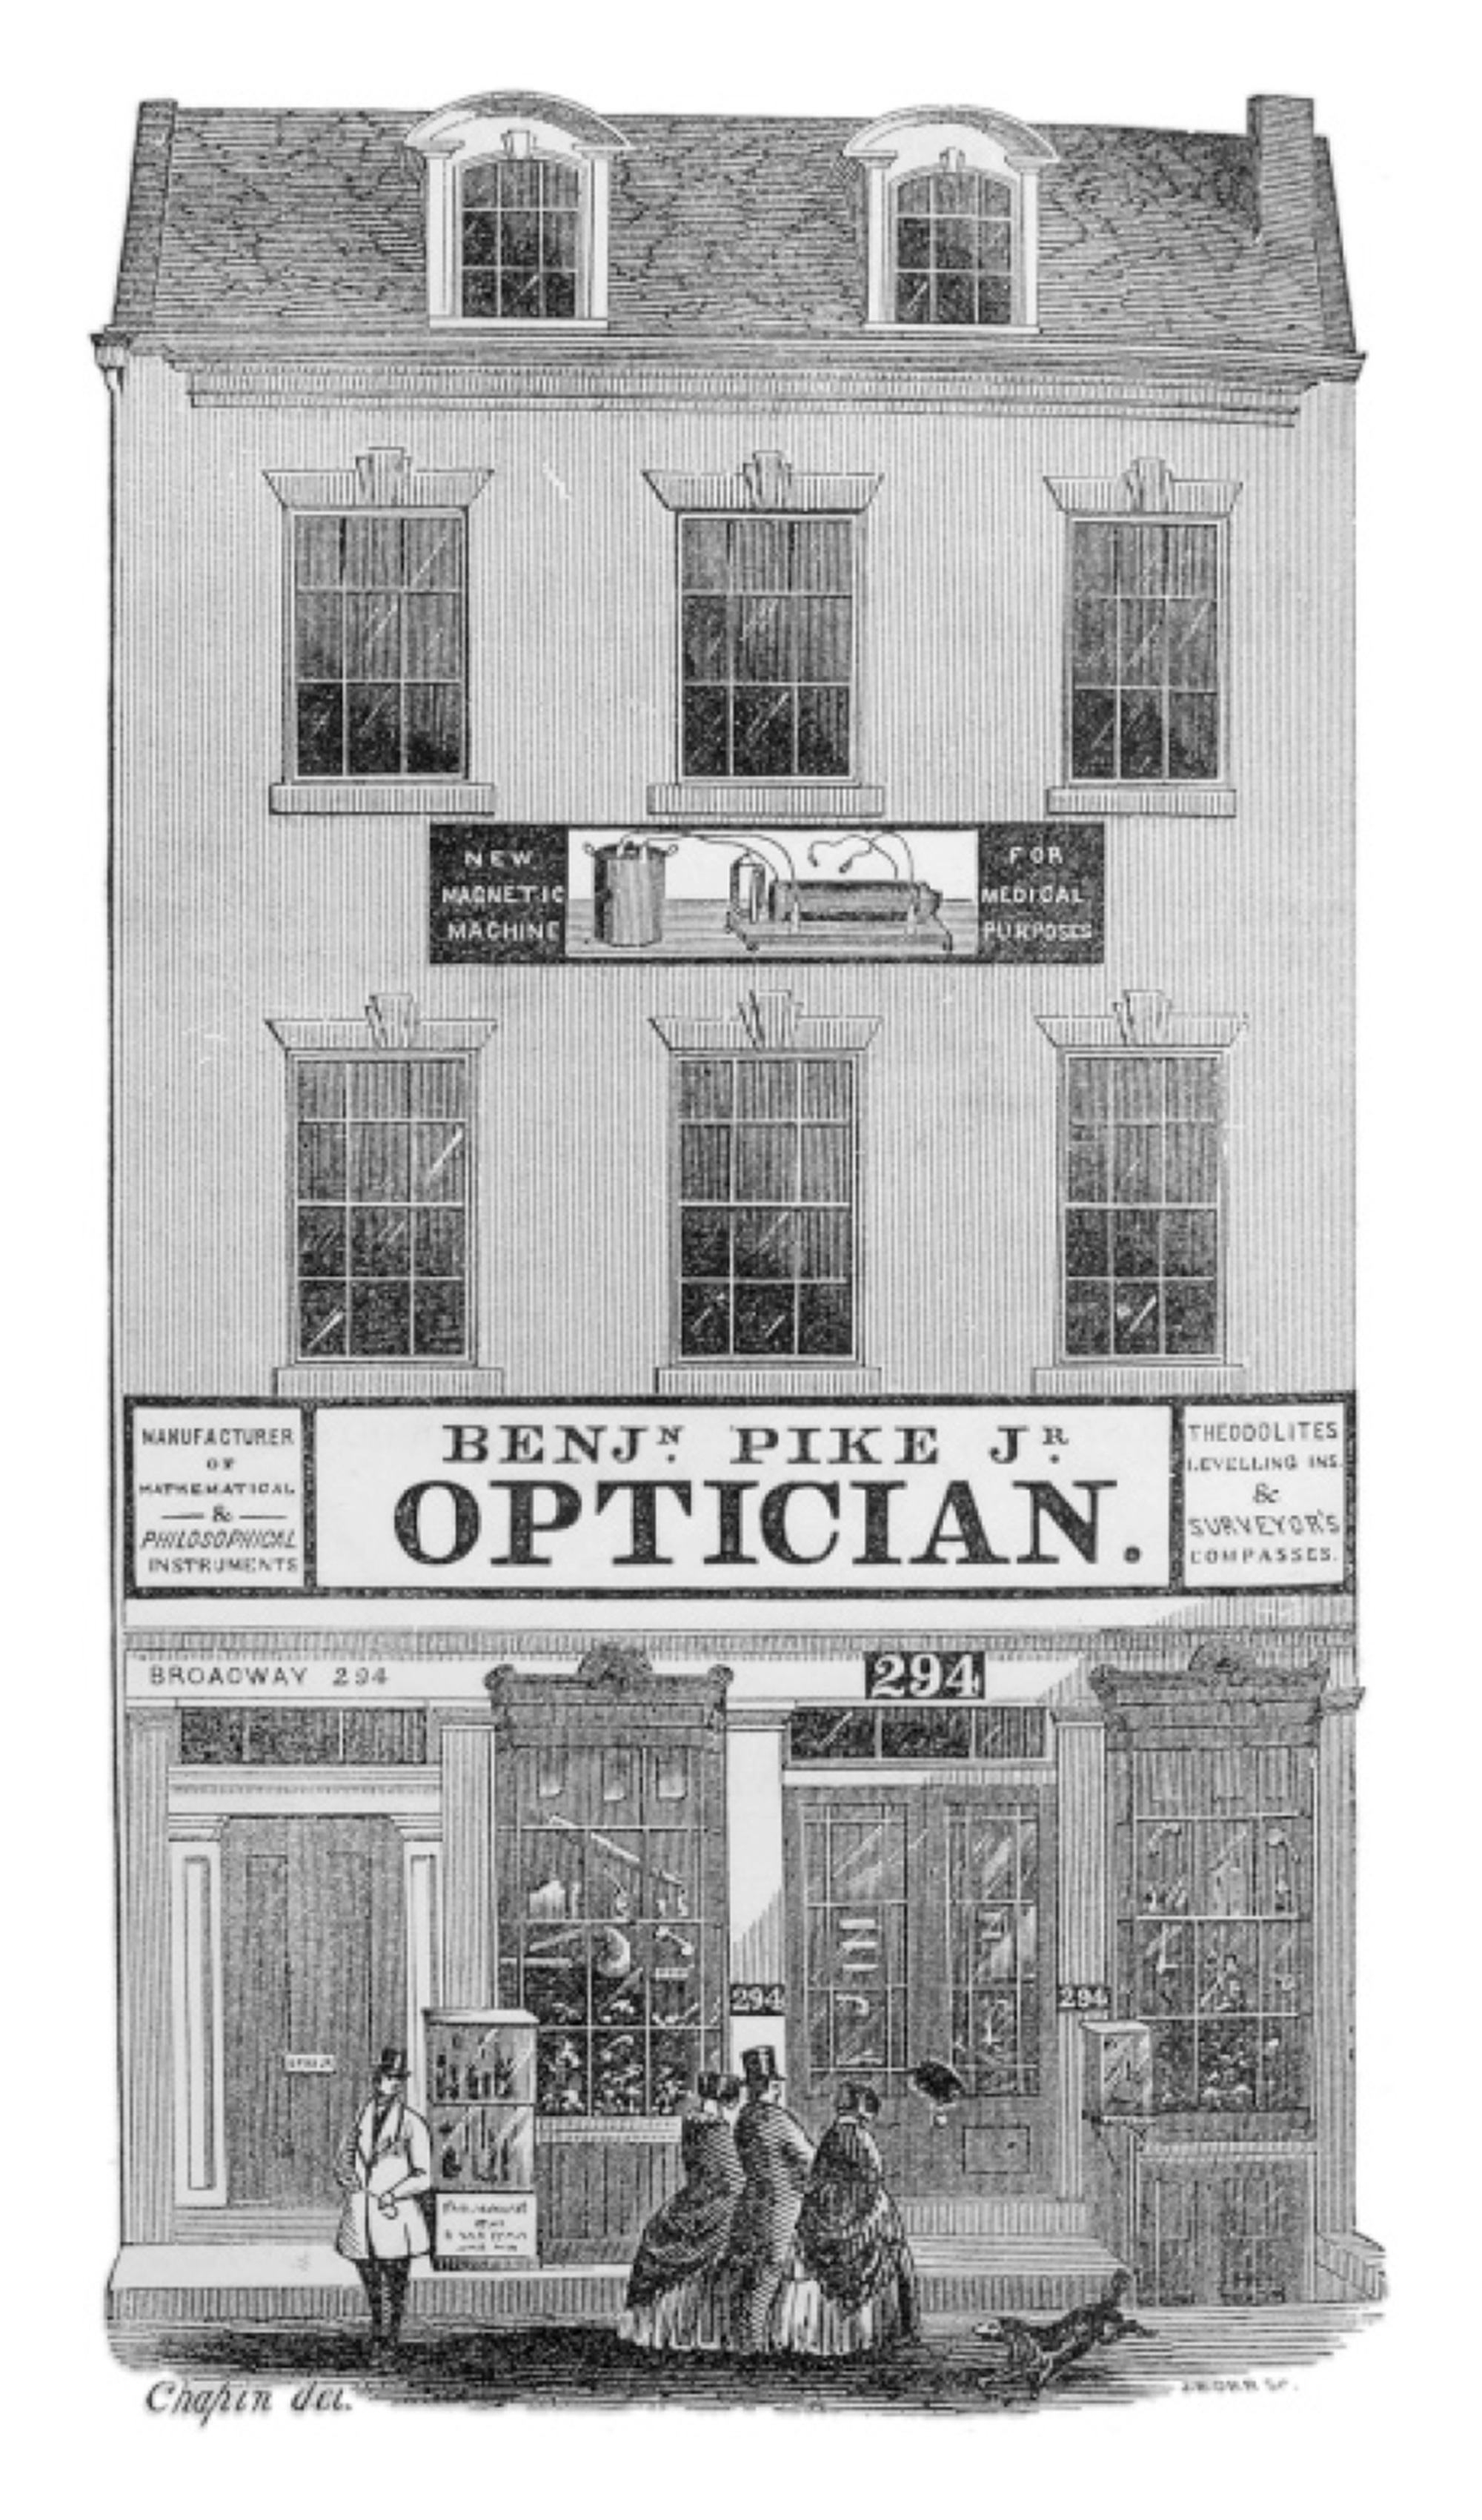 An illustration of 294 Broadway, Benjamin Pike Jr’s optician shop opened in 1840s. 